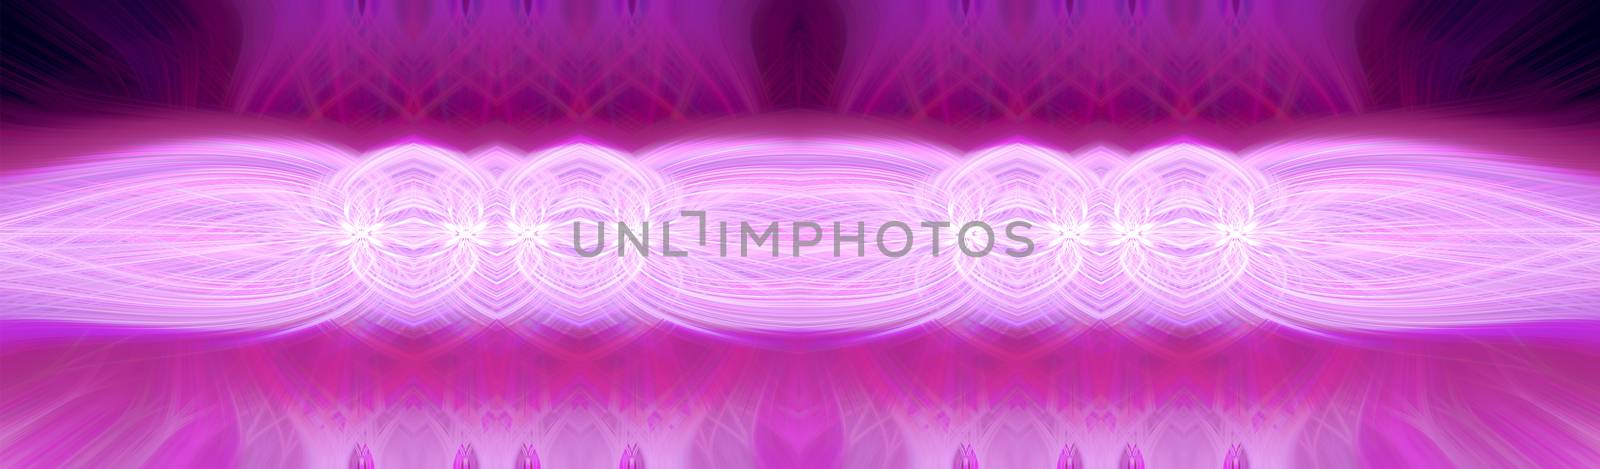 Beautiful abstract intertwined 3d fibers forming a shape of sparkle, flame, flower, interlinked hearts. Pink, maroon, and purple colors. Illustration. Banner, panorama size.